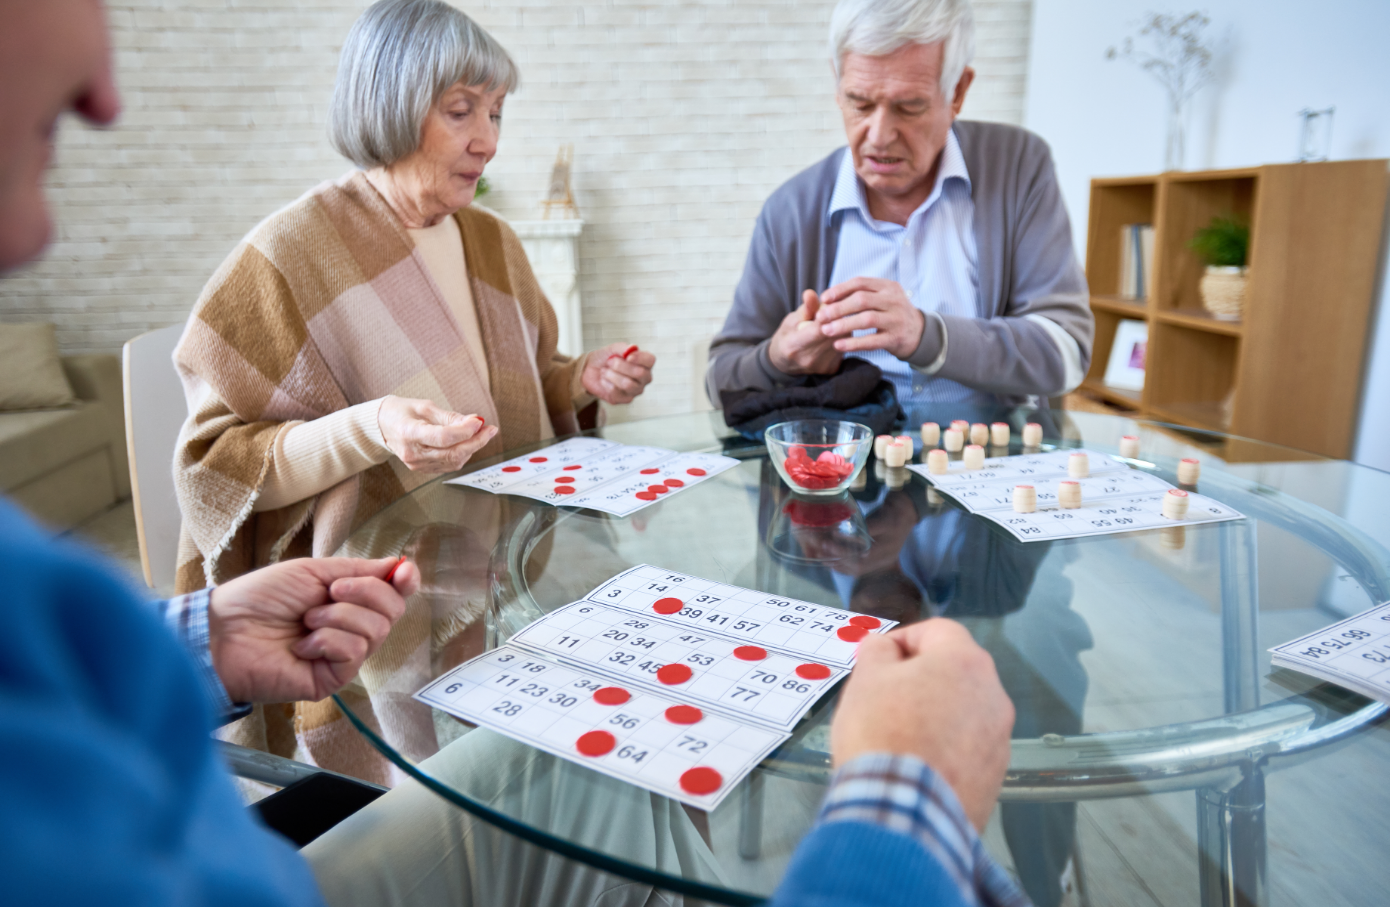 100+ Activity Ideas for Seniors in Assisted Living